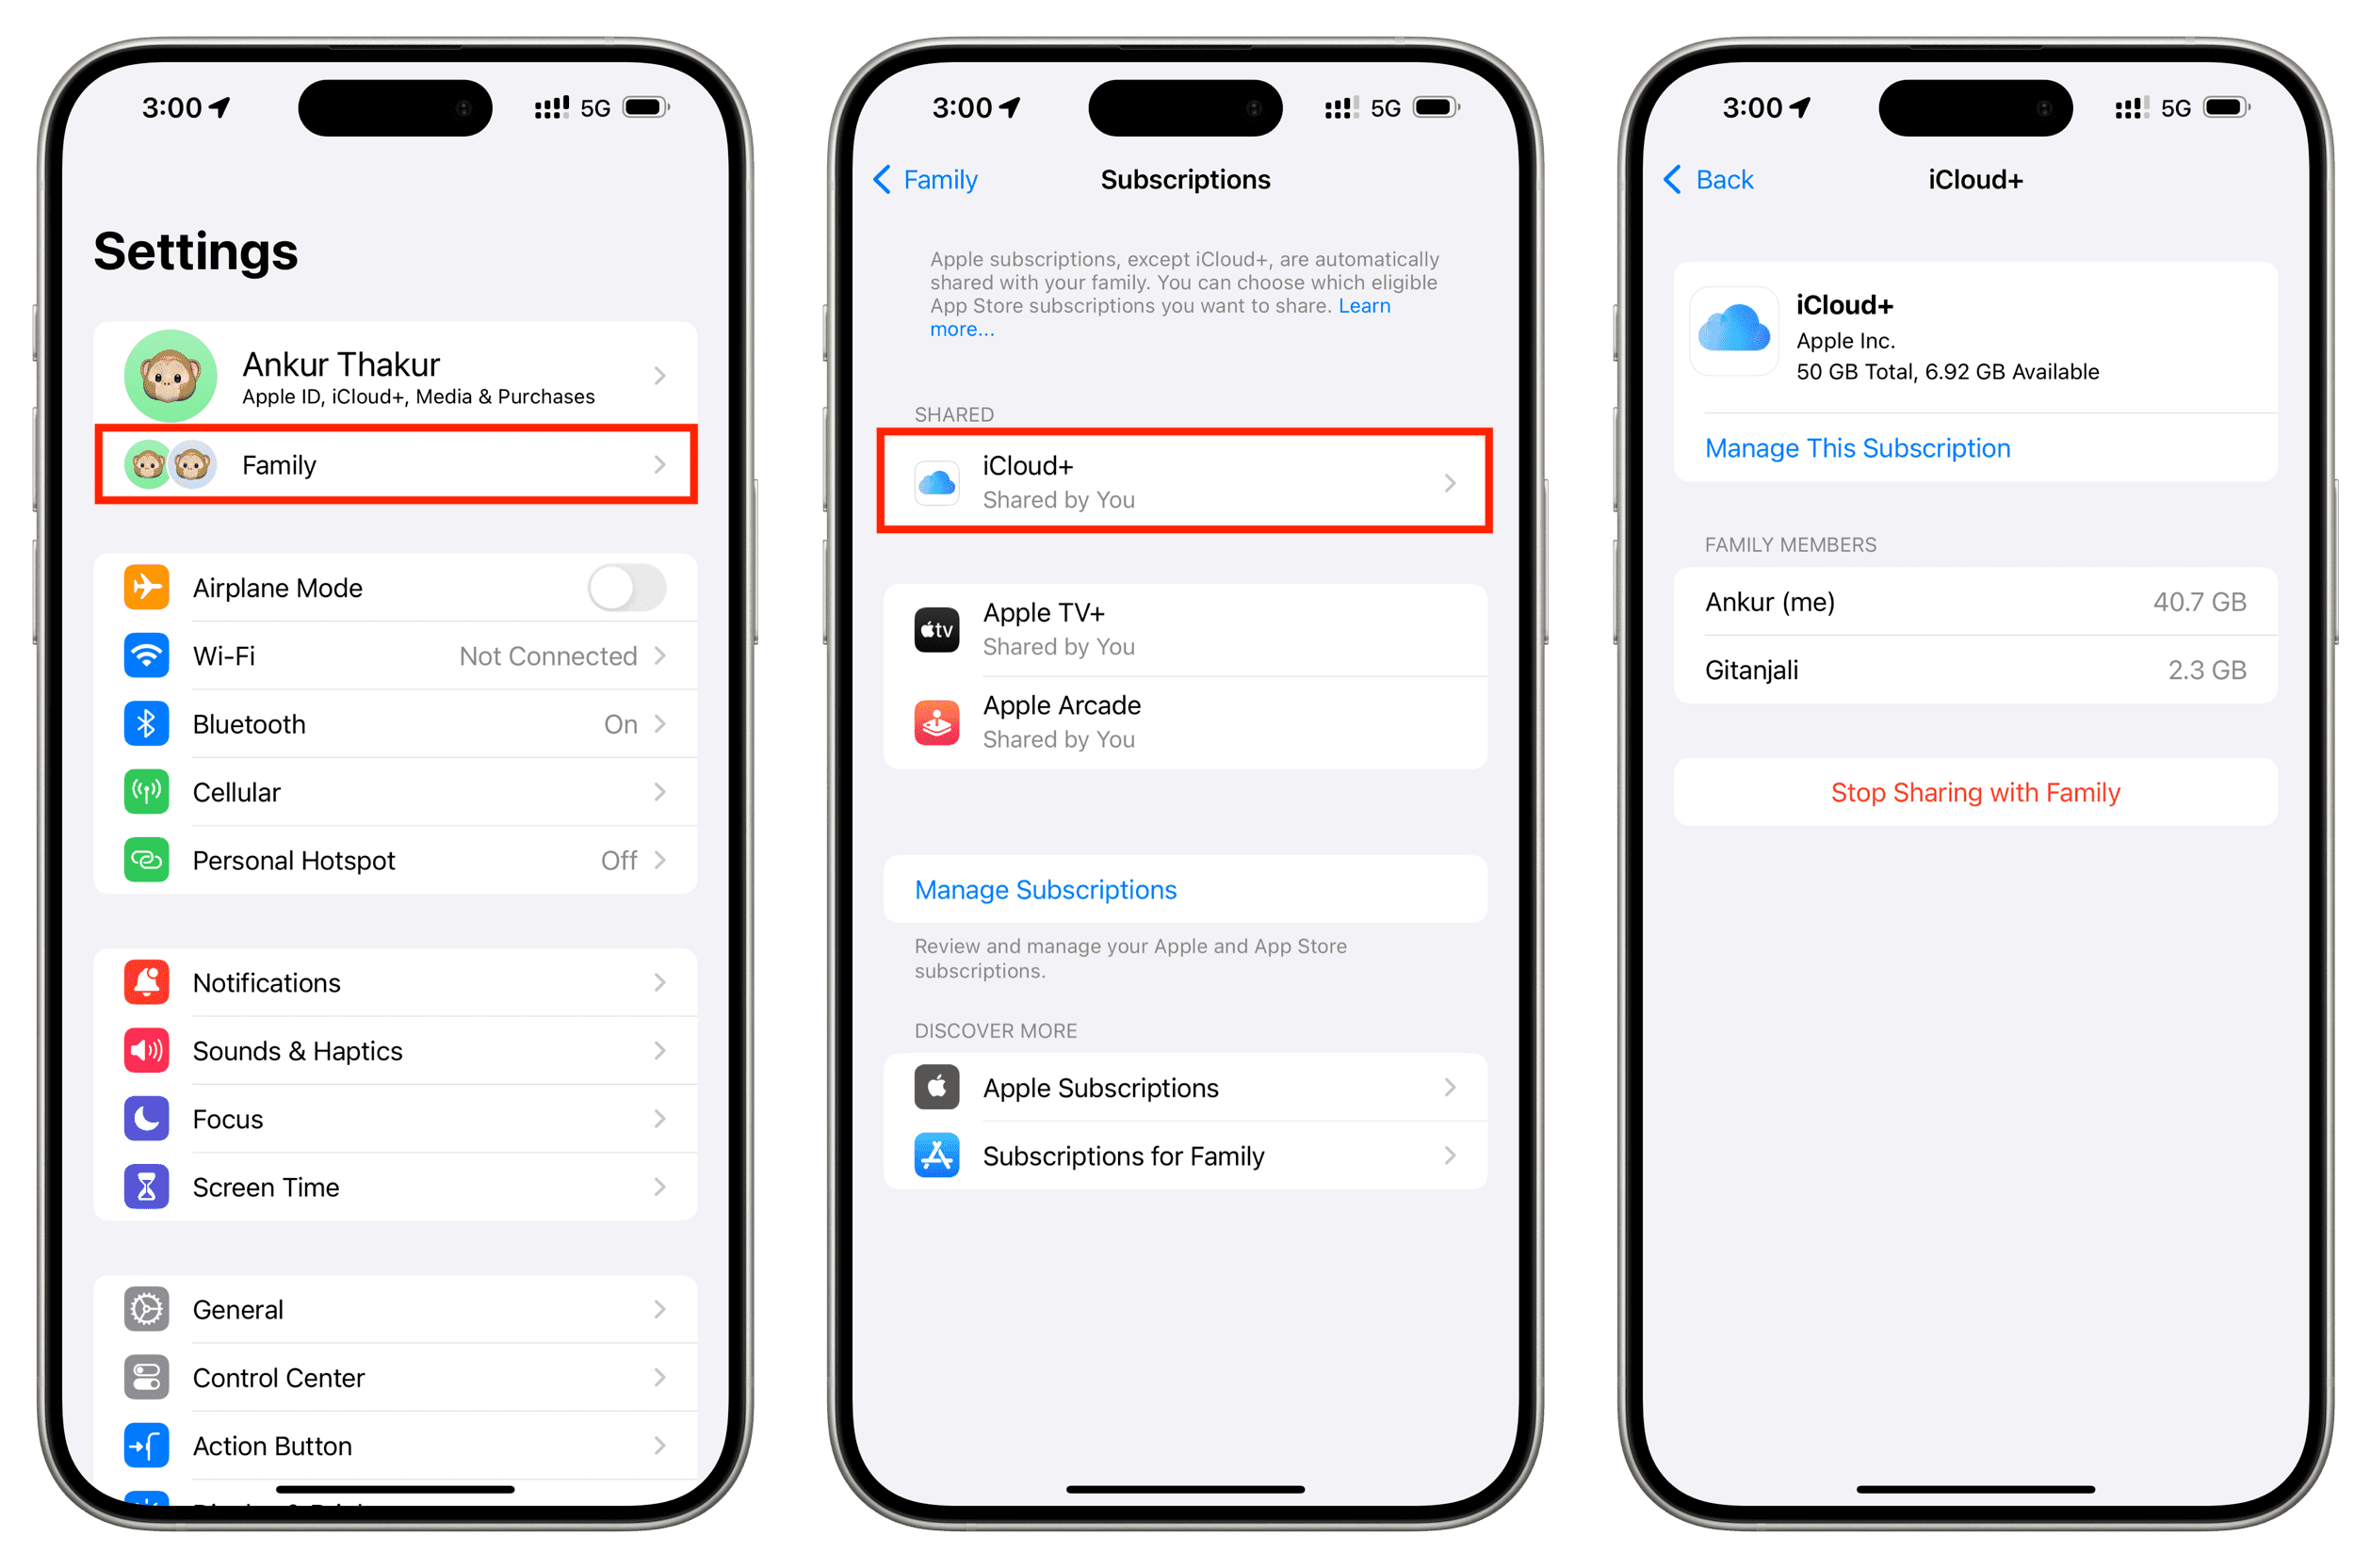 Tap Family, Subscriptions, iCloud Plus in iPhone Settings to see details about shared iCloud storage